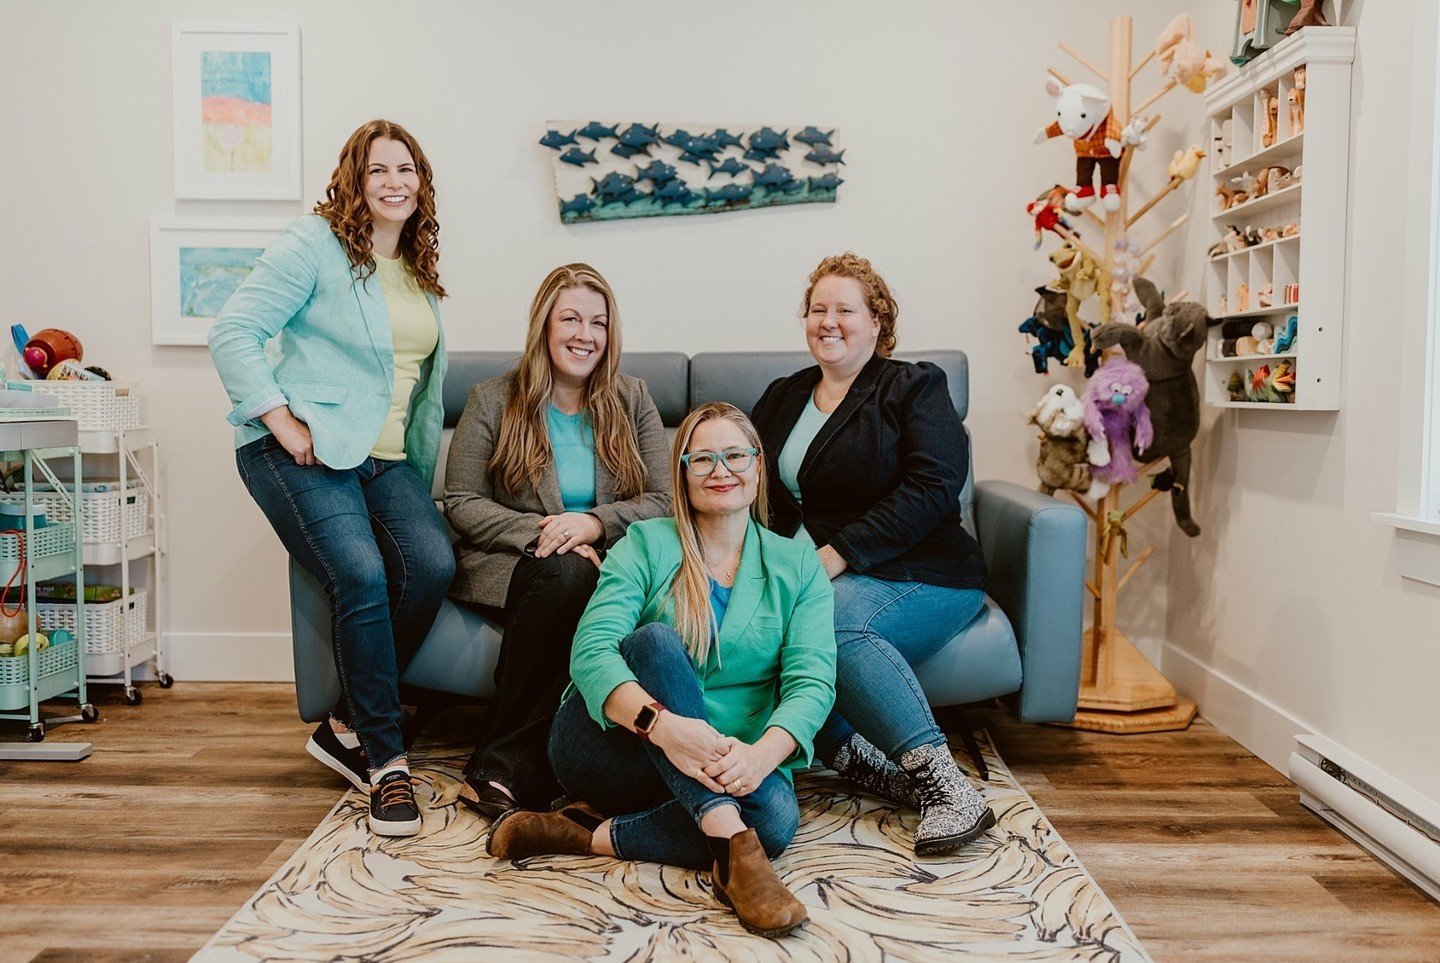 Meet the team at Riptide Counselling in Fredericton, offering online and in-person sessions. 

@riptidecounselling

#brandingsession #corporatephotography #brandphotographer #brandsession #newbrunswickphotograher #advertisingphotography #productphoto